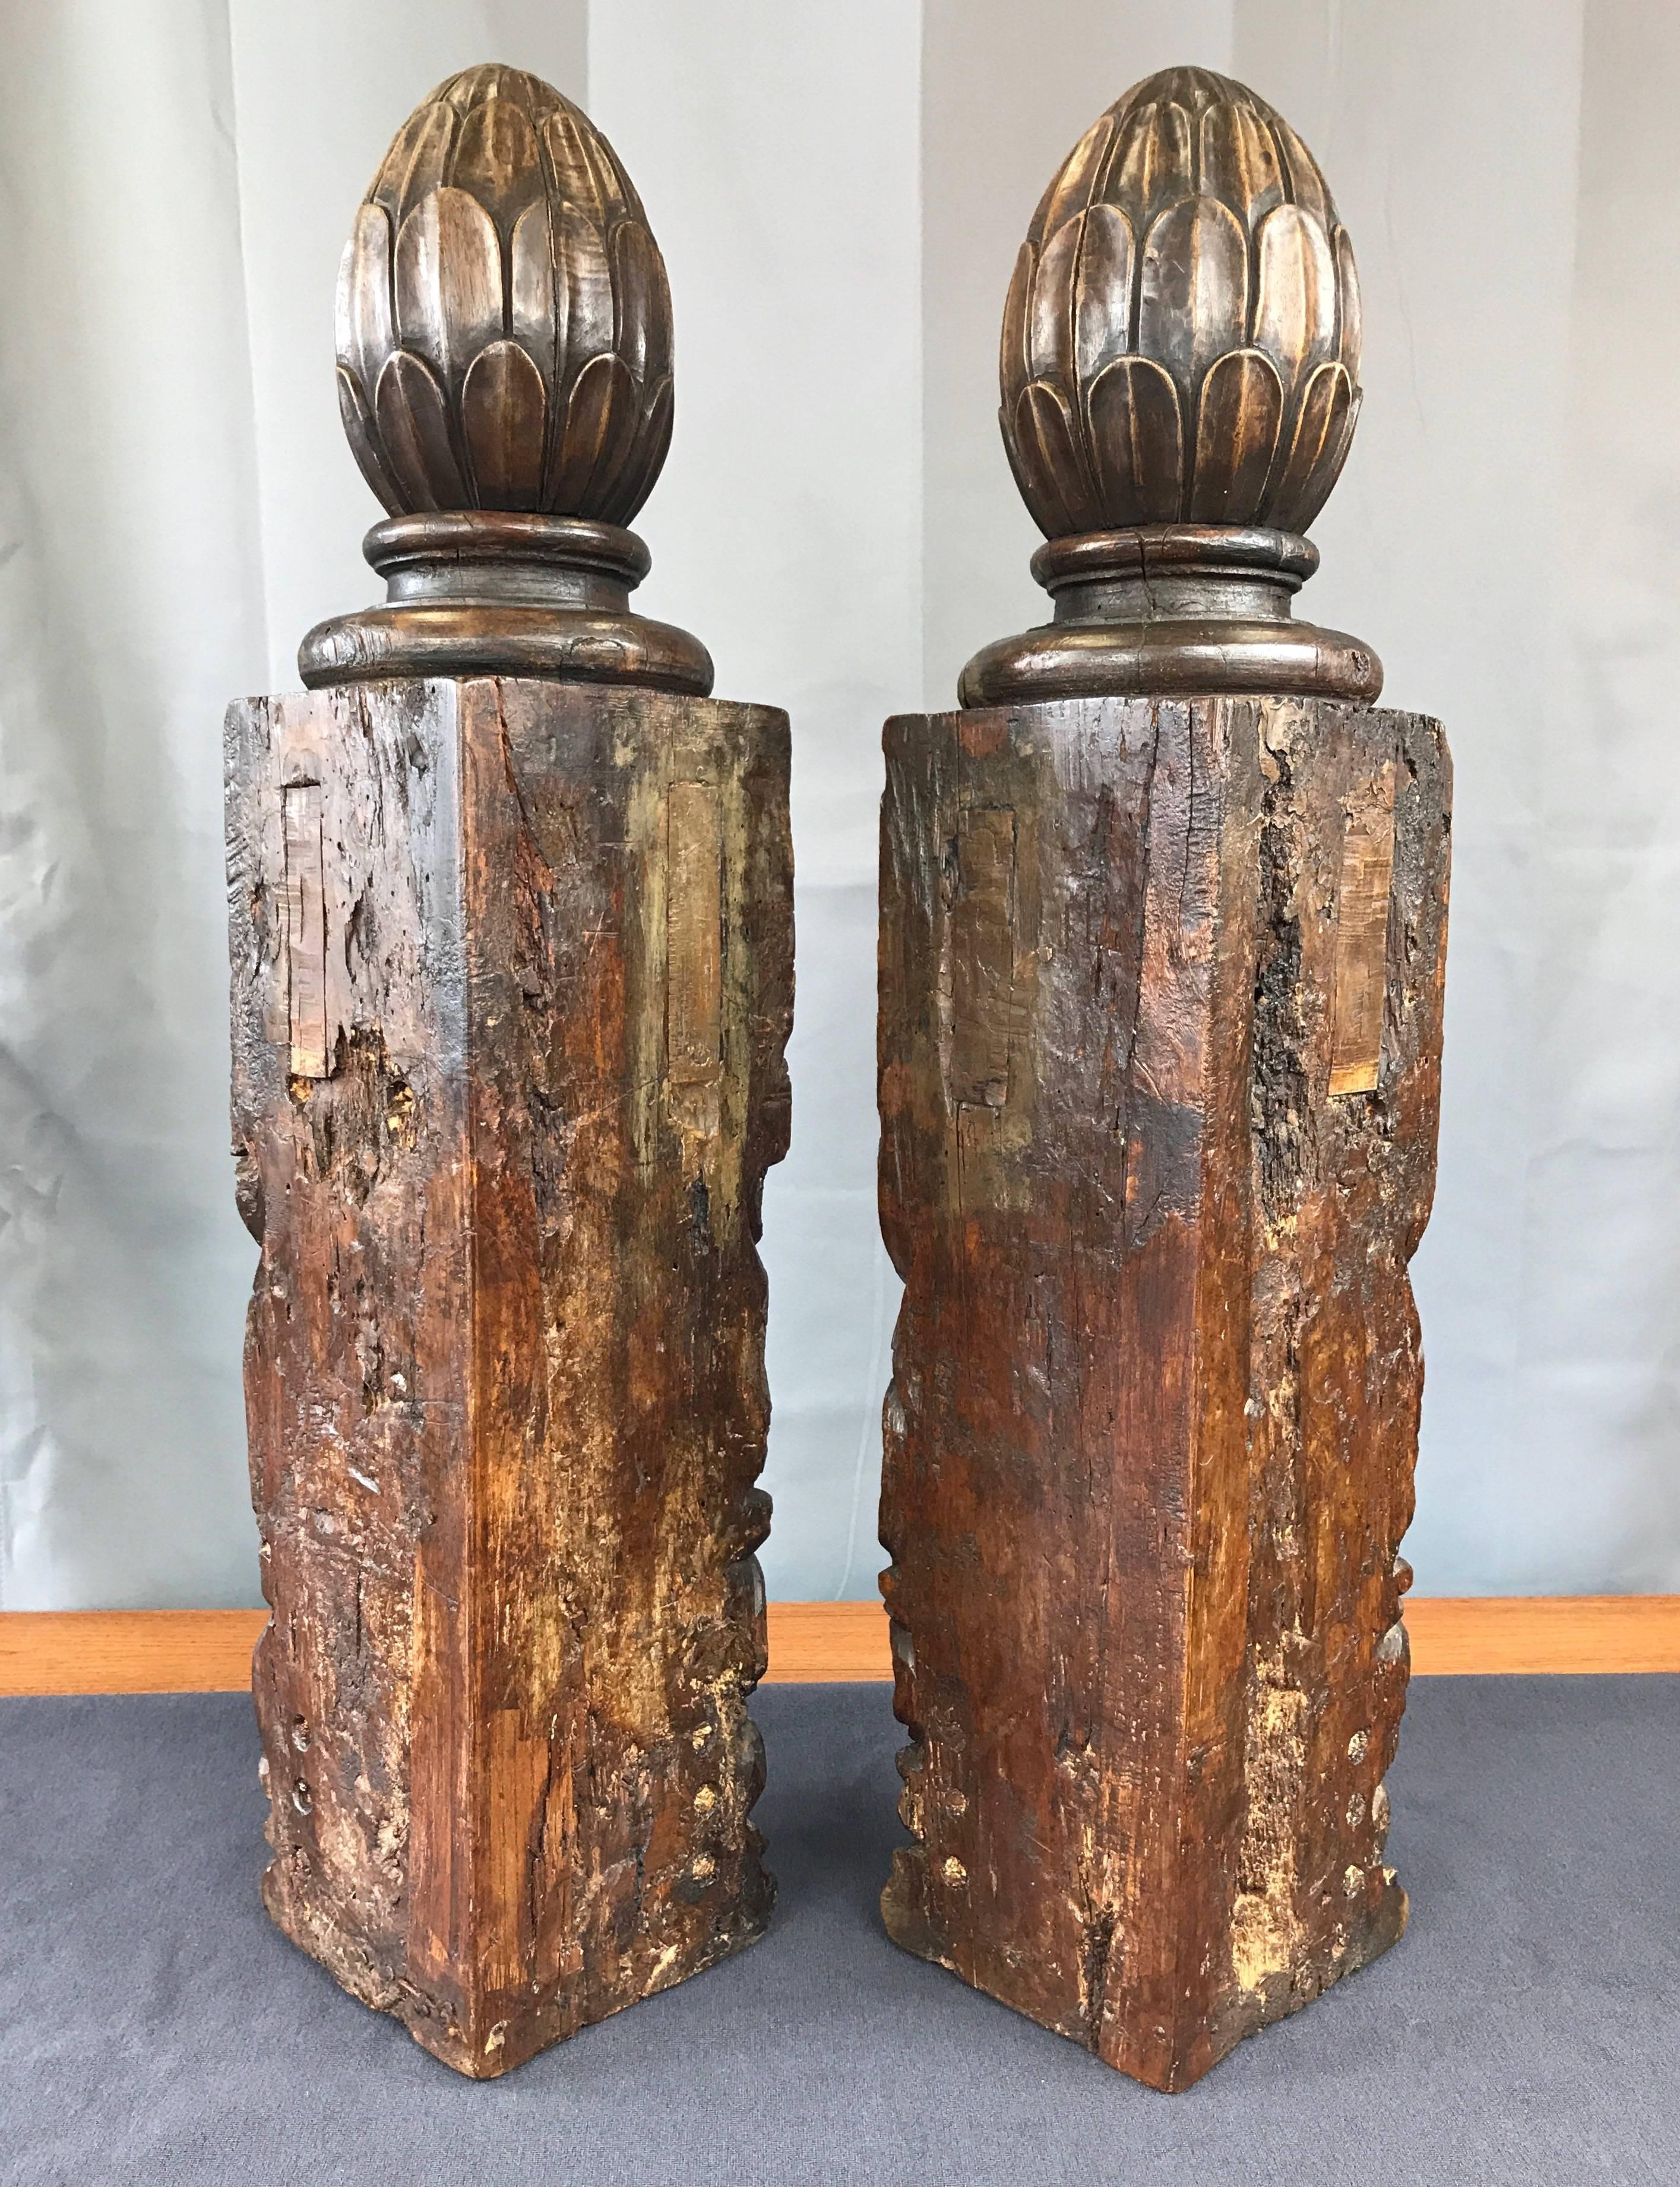 Mahogany Pair of Impressively Sized and Expressive Hand-Carved Antique Newel Posts